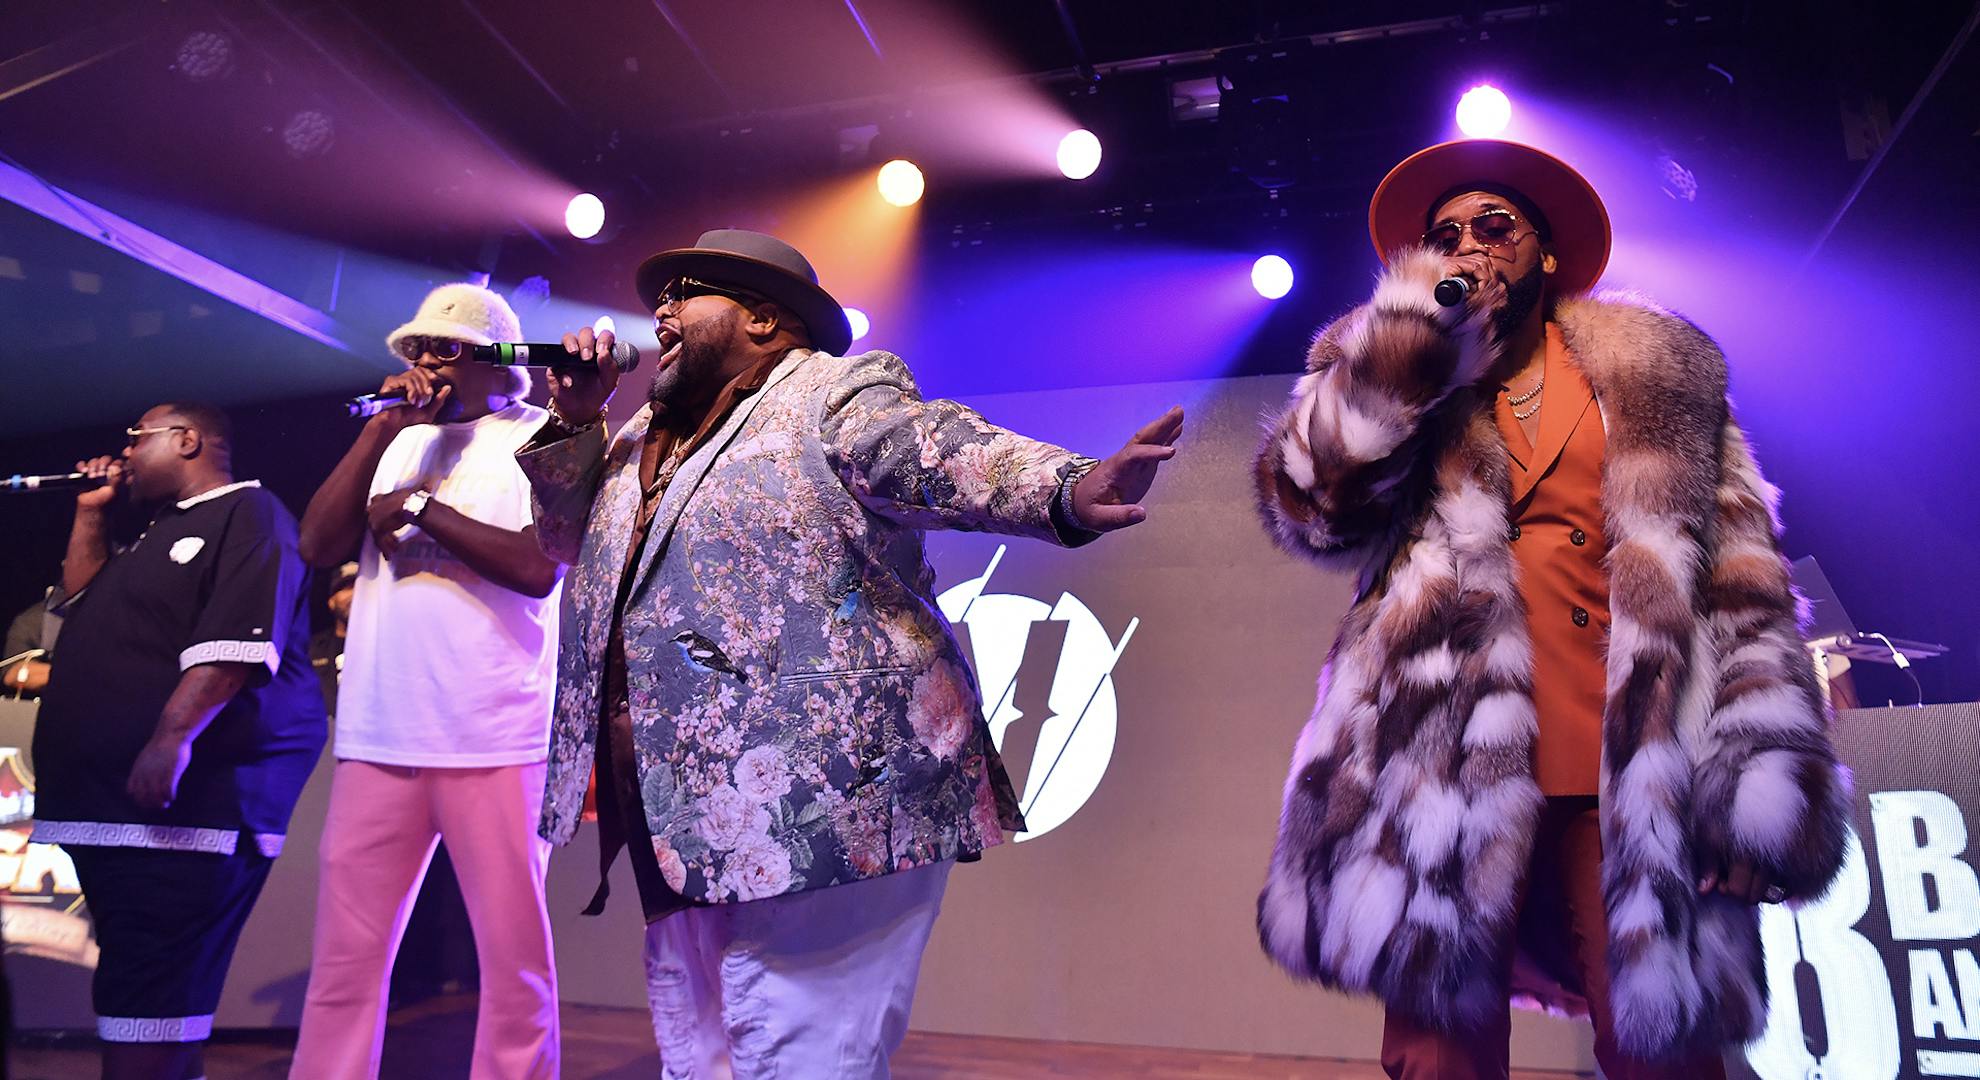 8Ball, MJG, Jazze Pha, and Tela perform onstage during VERZUZ 8 Ball & MJG vs UGK at Terminal West on May 26, 2022 in Atlanta, Georgia. (Photo by Paras Griffin/Getty Images)